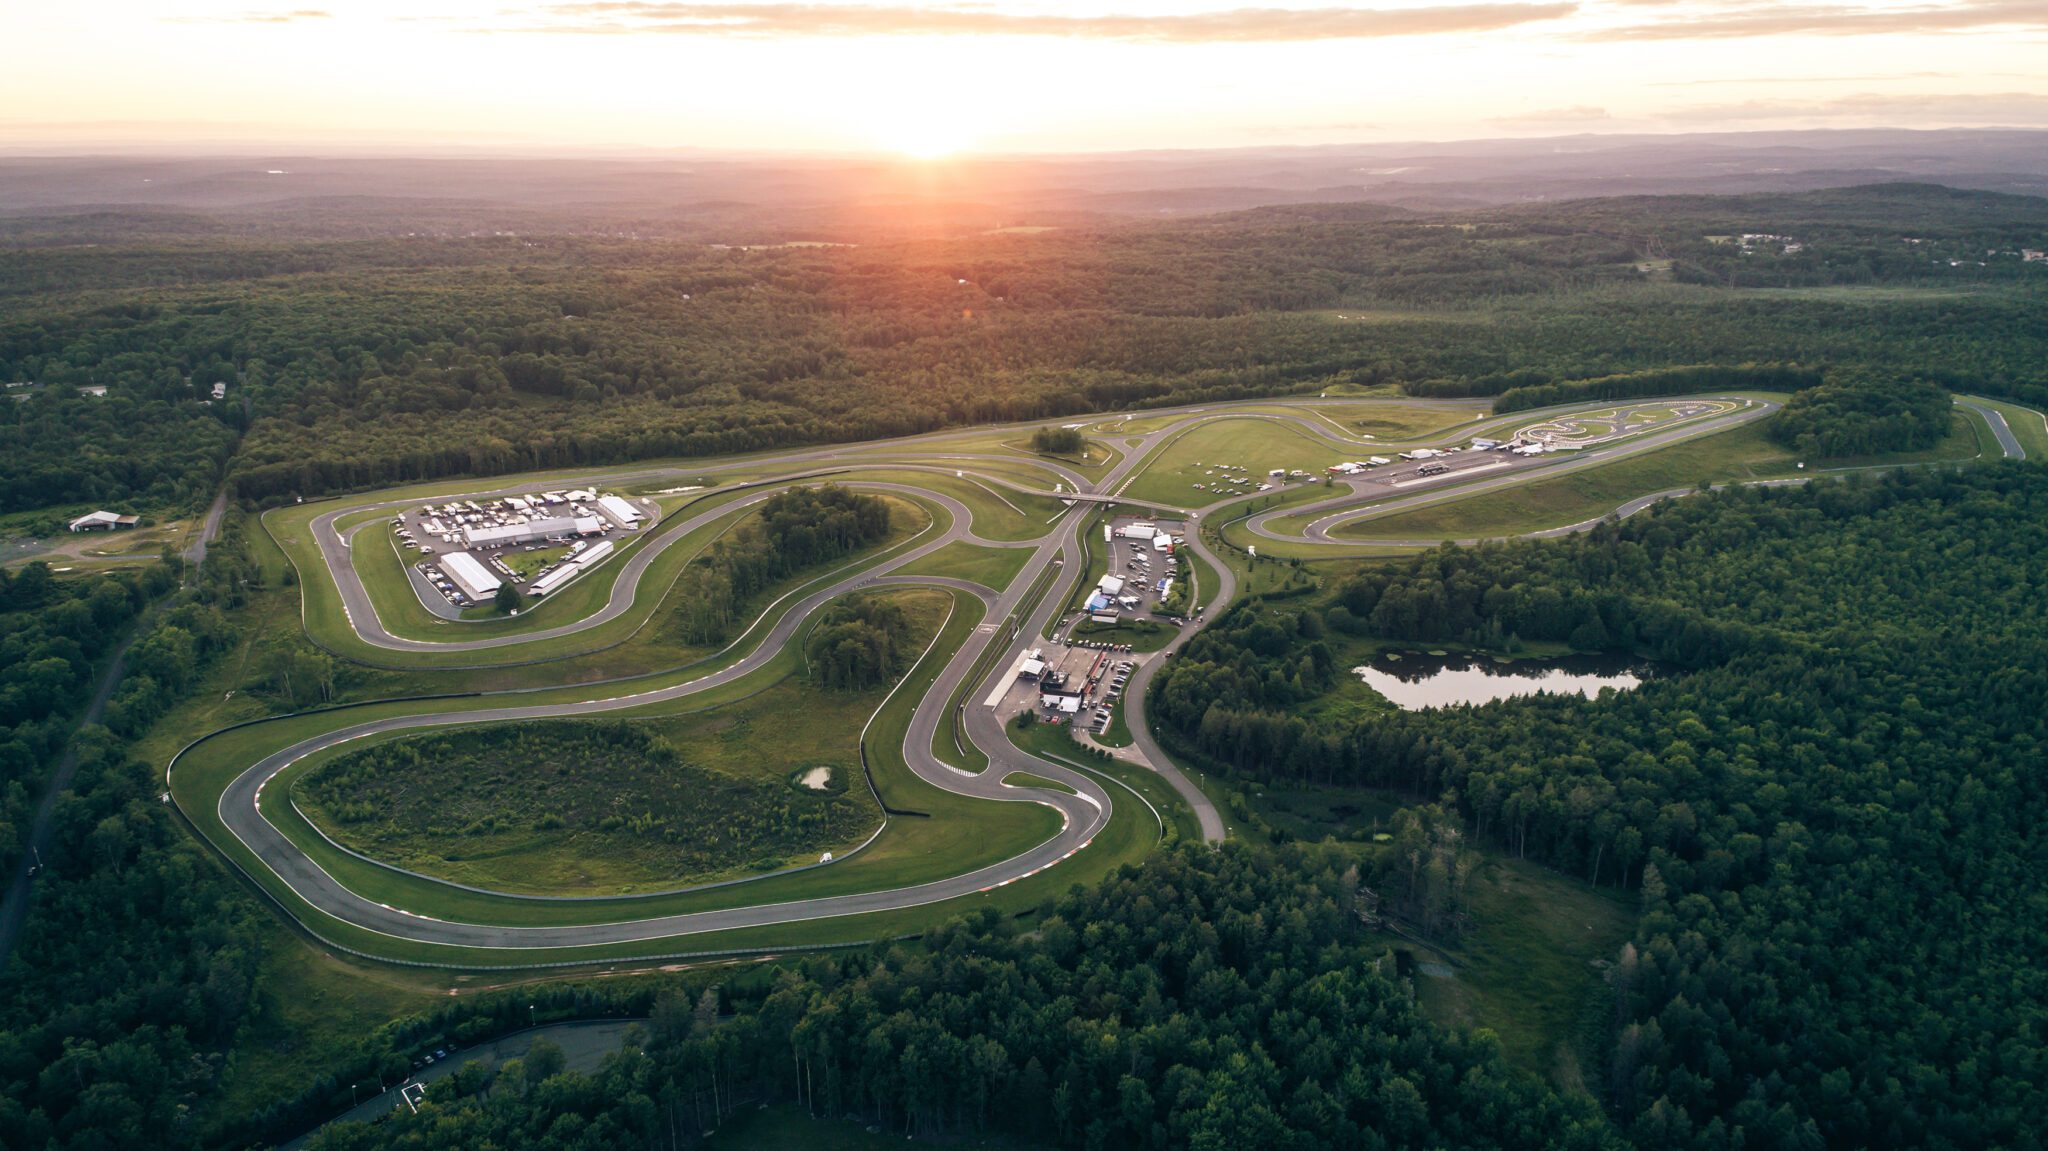 bird's eye view of monticello motor club race track